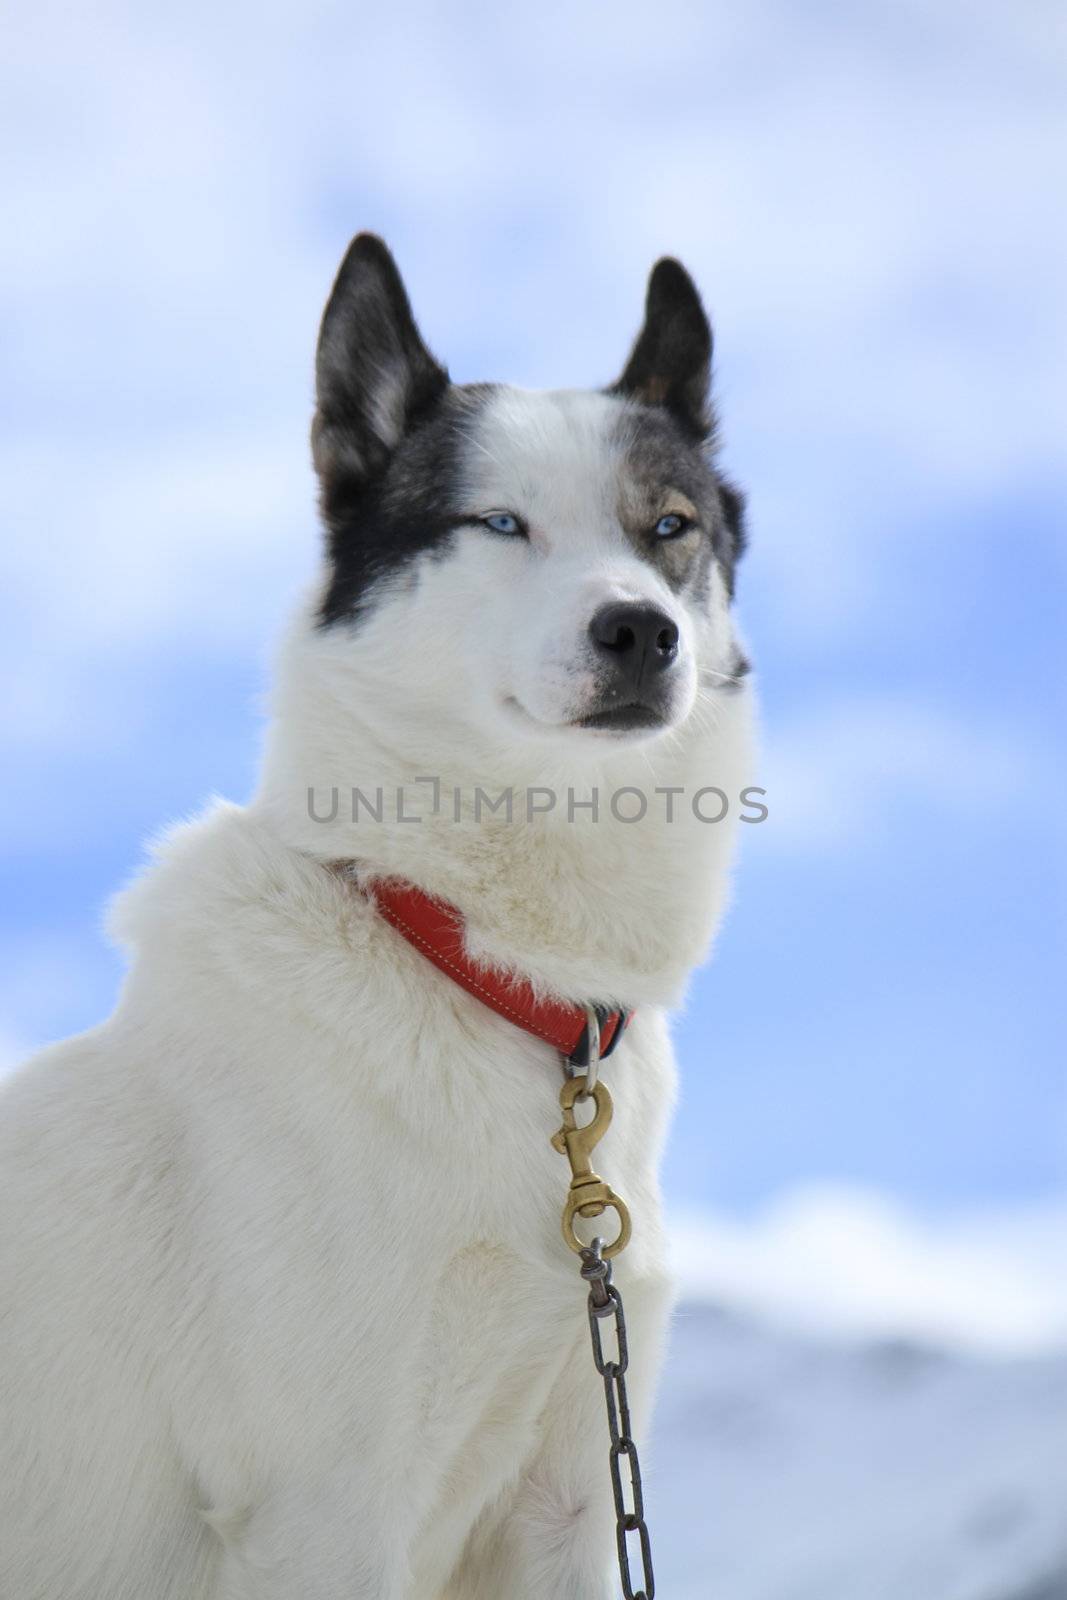 Siberian husky dog wearing red necklace portrait and cloudy sky background